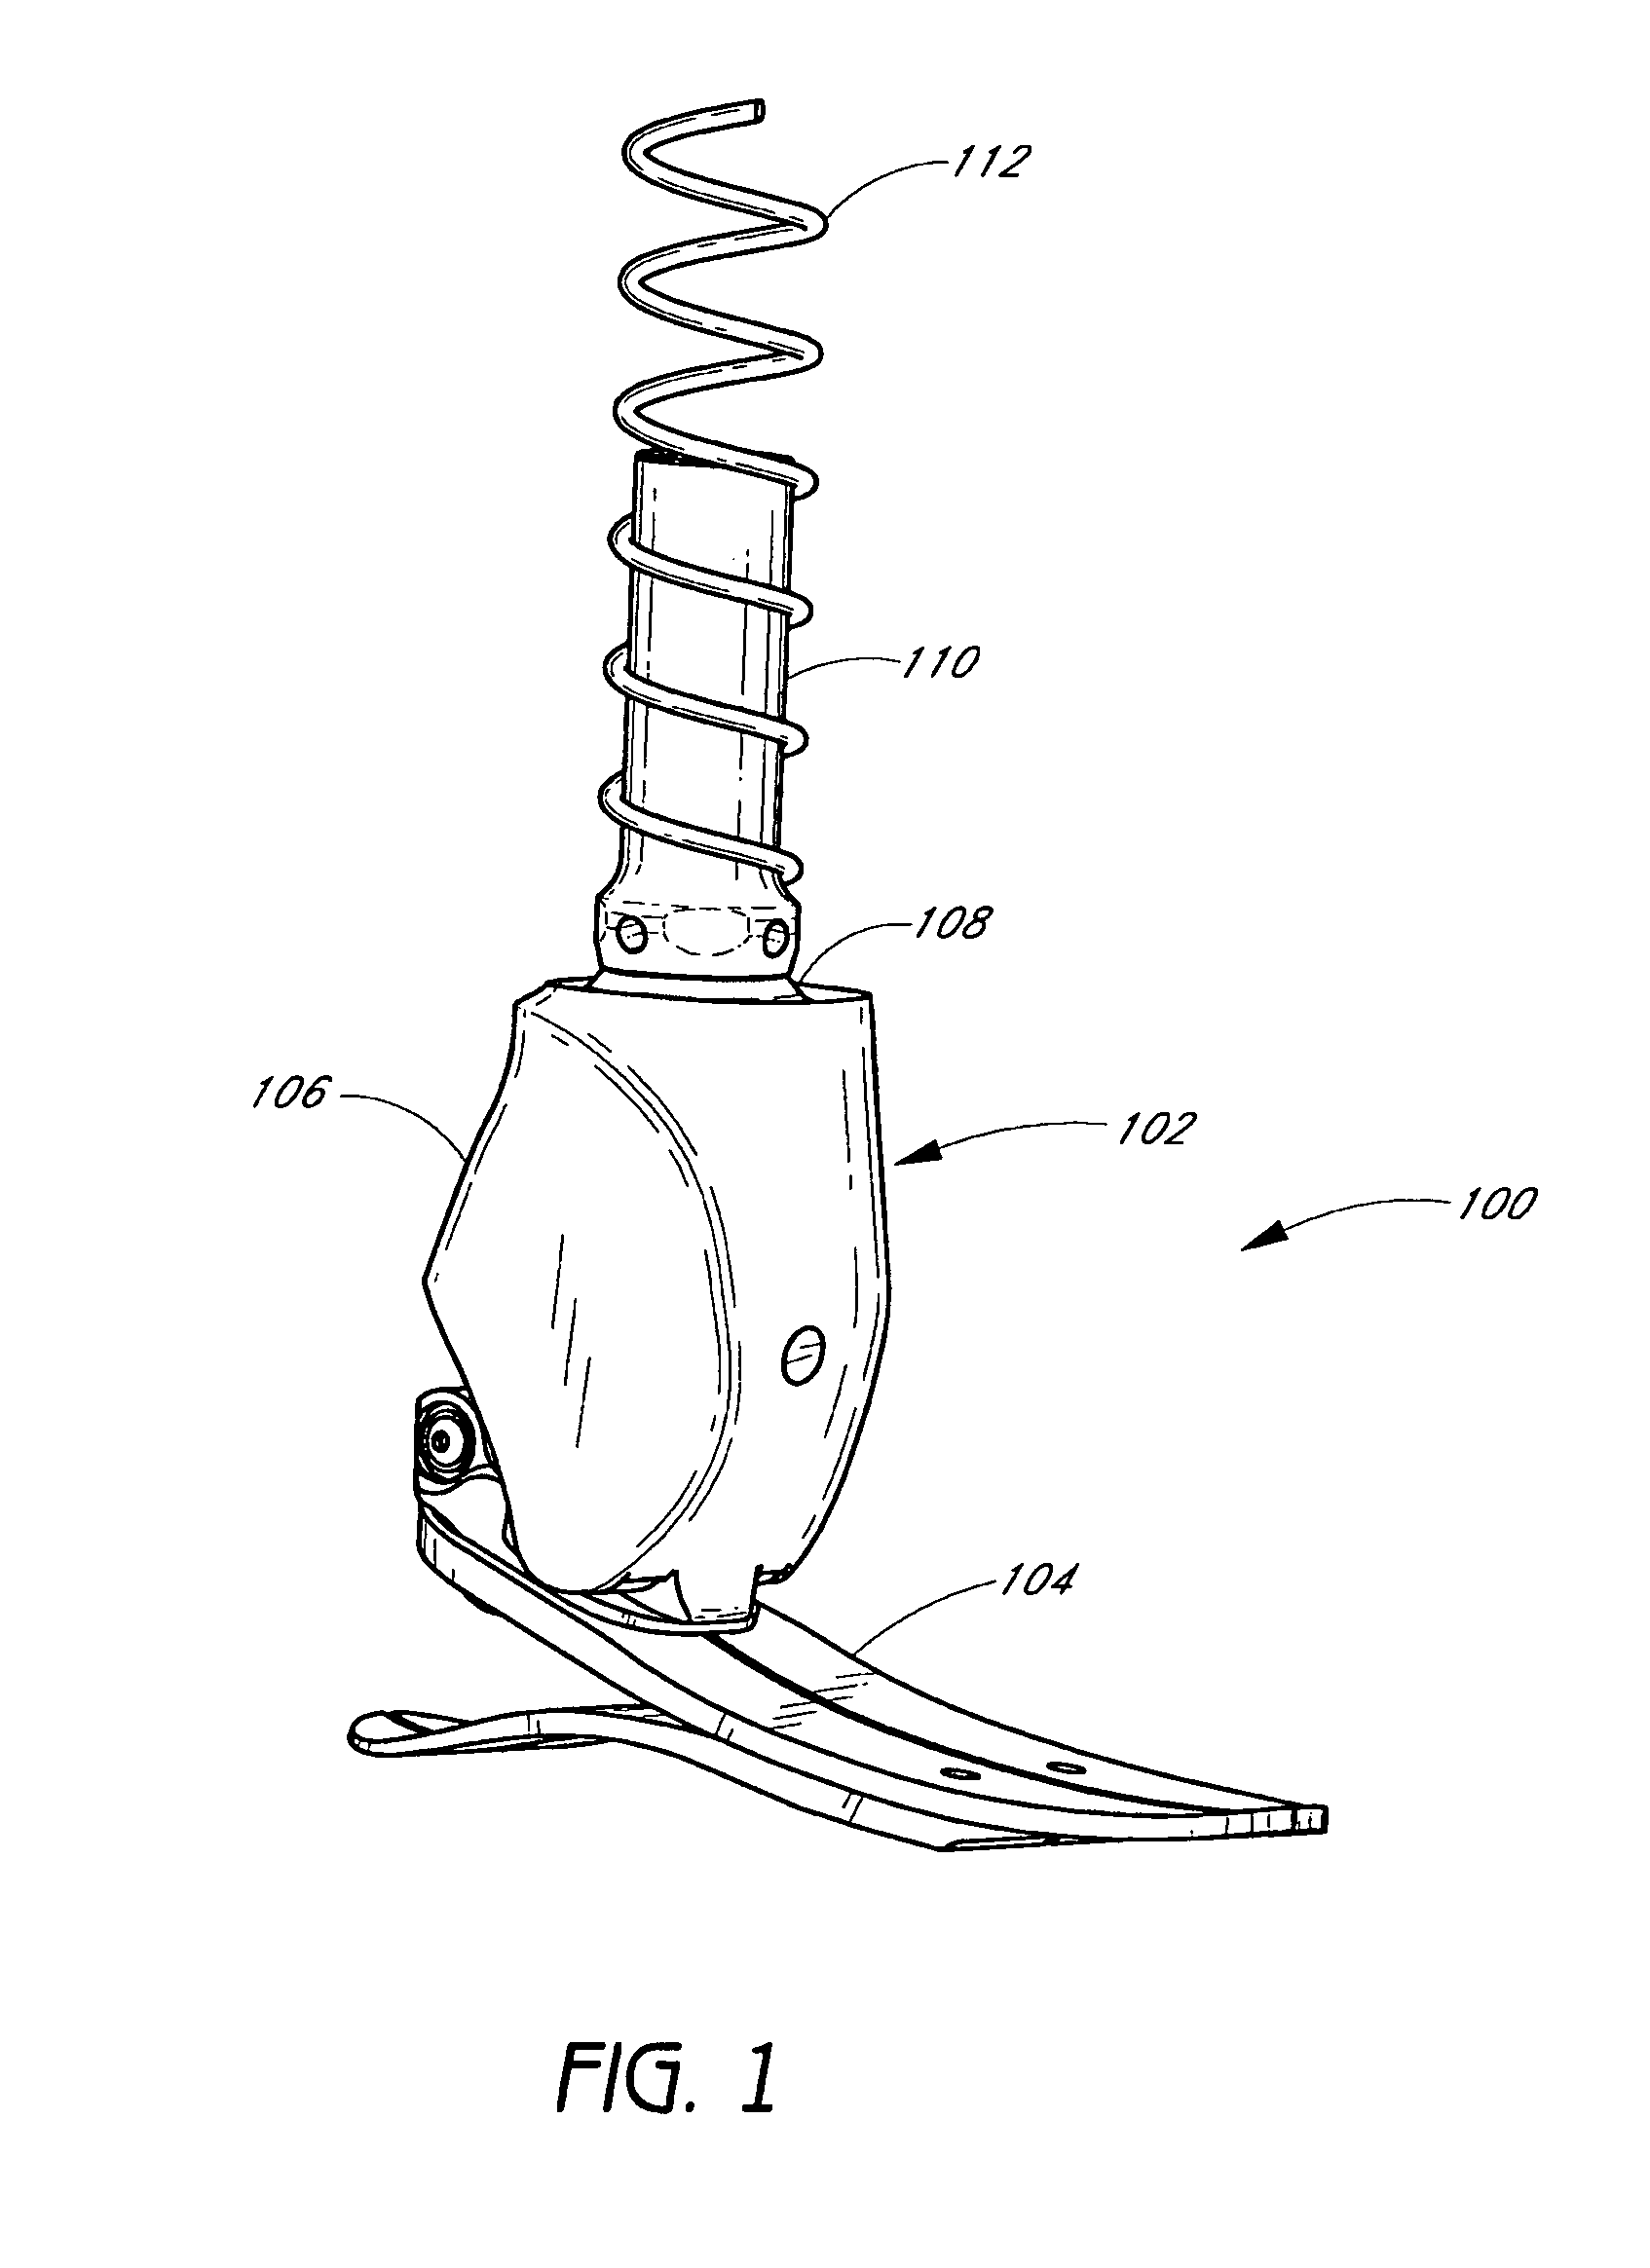 Actuator assembly for prosthetic or orthotic joint